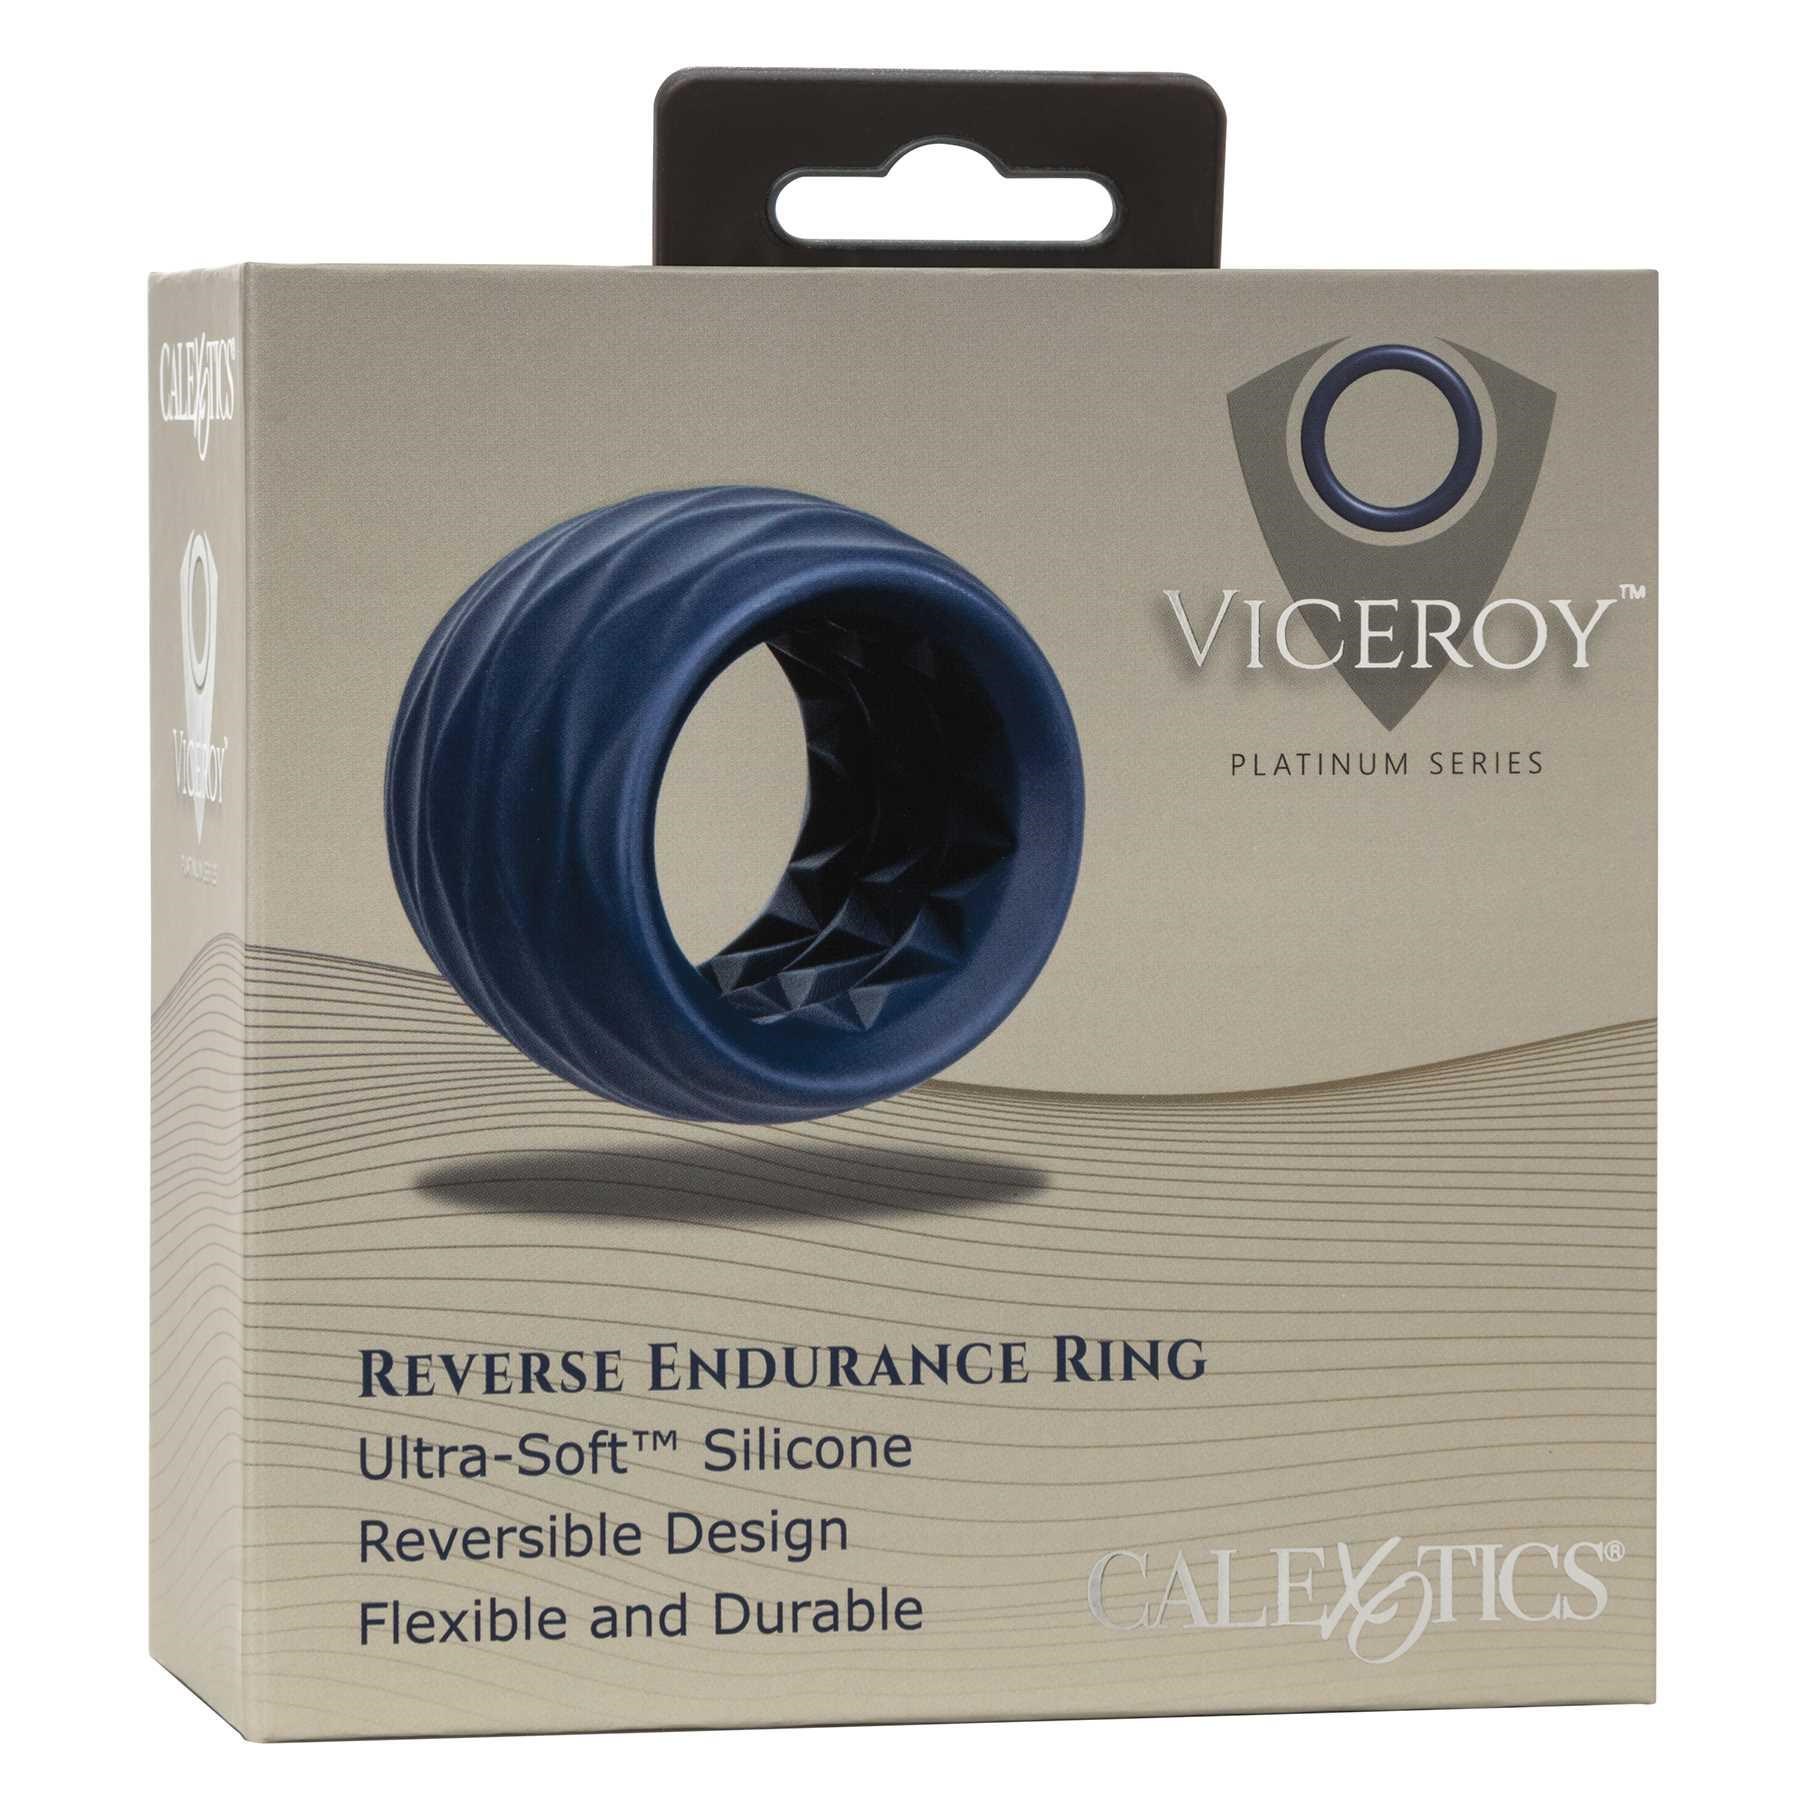 Viceroy Reverse Endurance Ring front of box